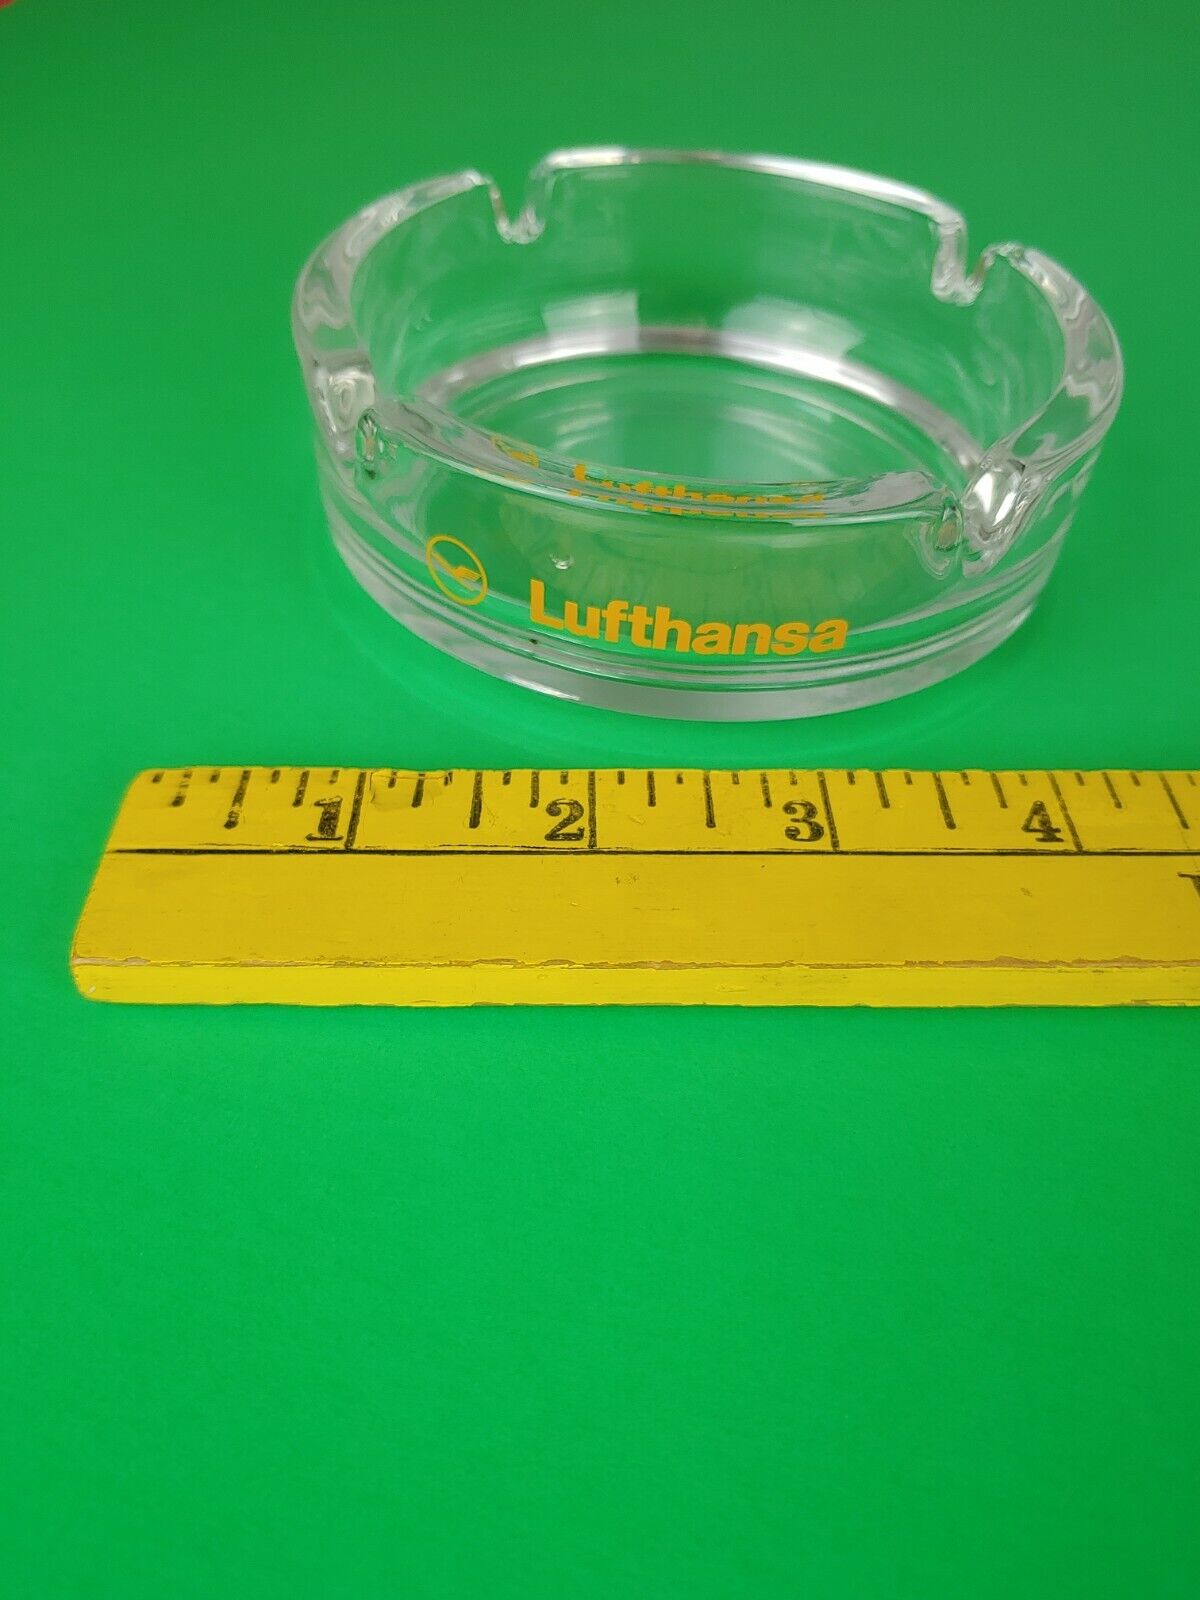 Lufthansa Airline Round Glass Ashtray w/ Yellow Imprinting Made in France